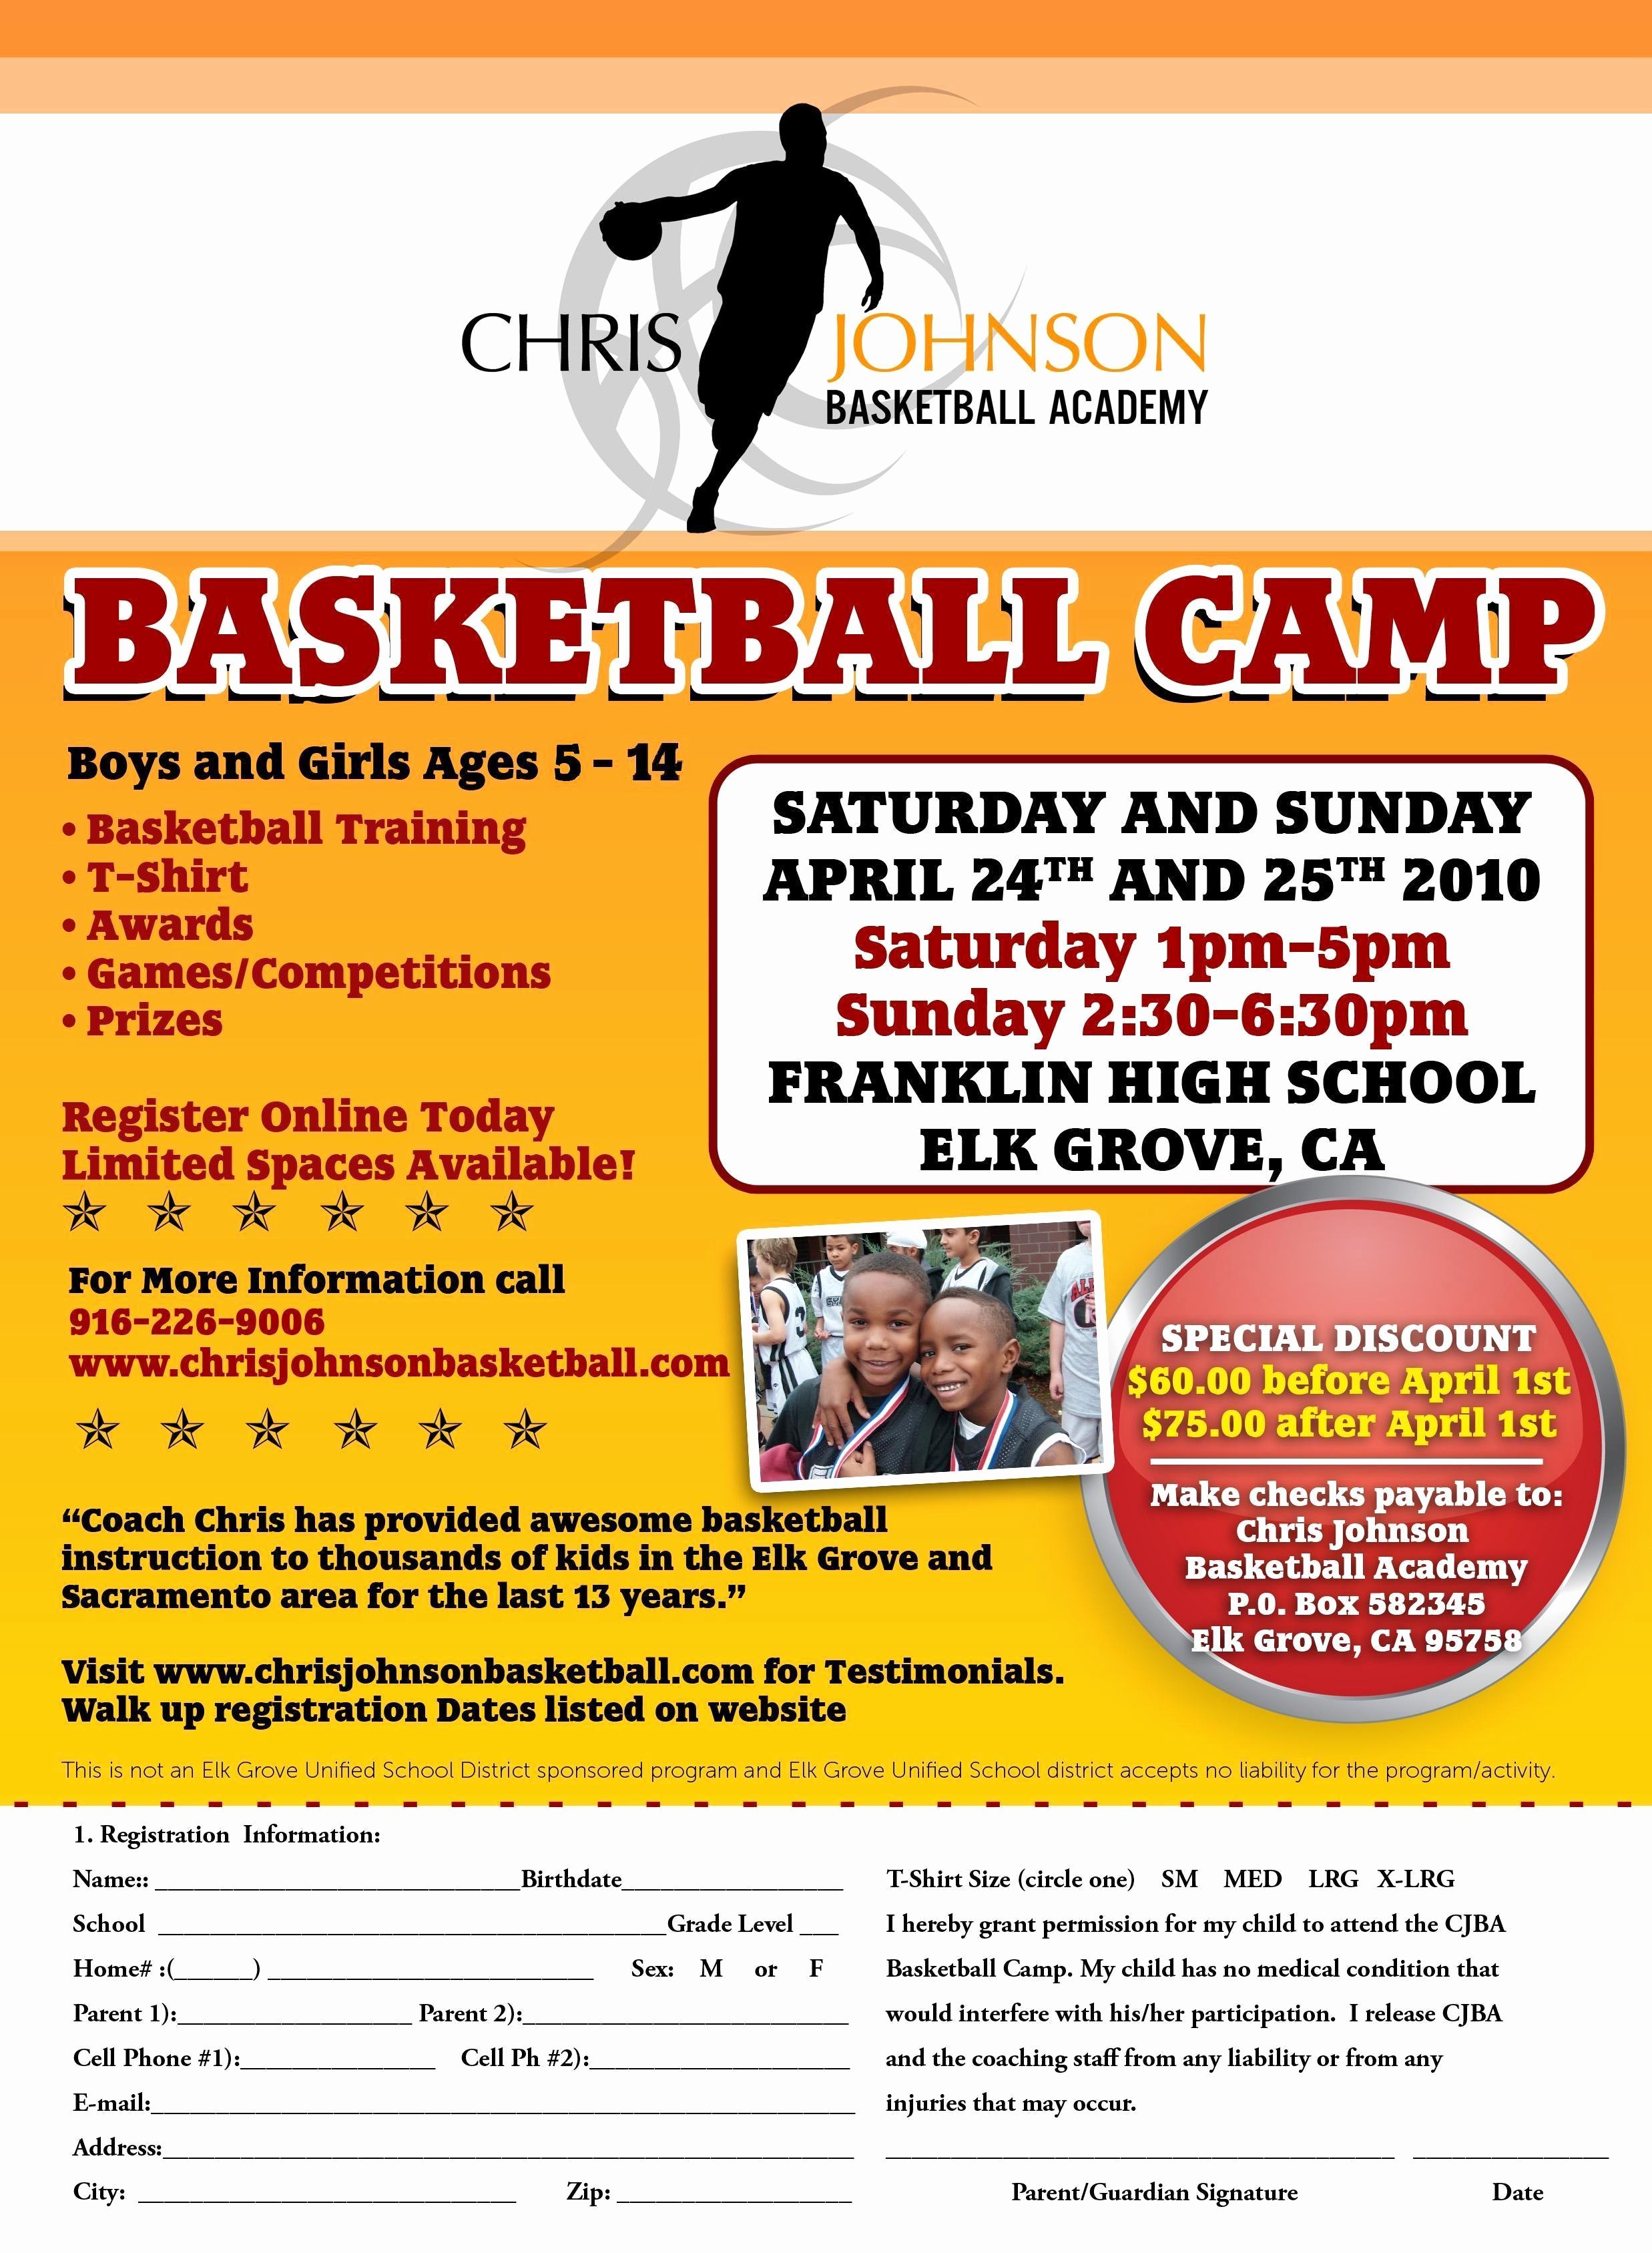 Pin Basketball Camp Flyer Template Image Search Results On